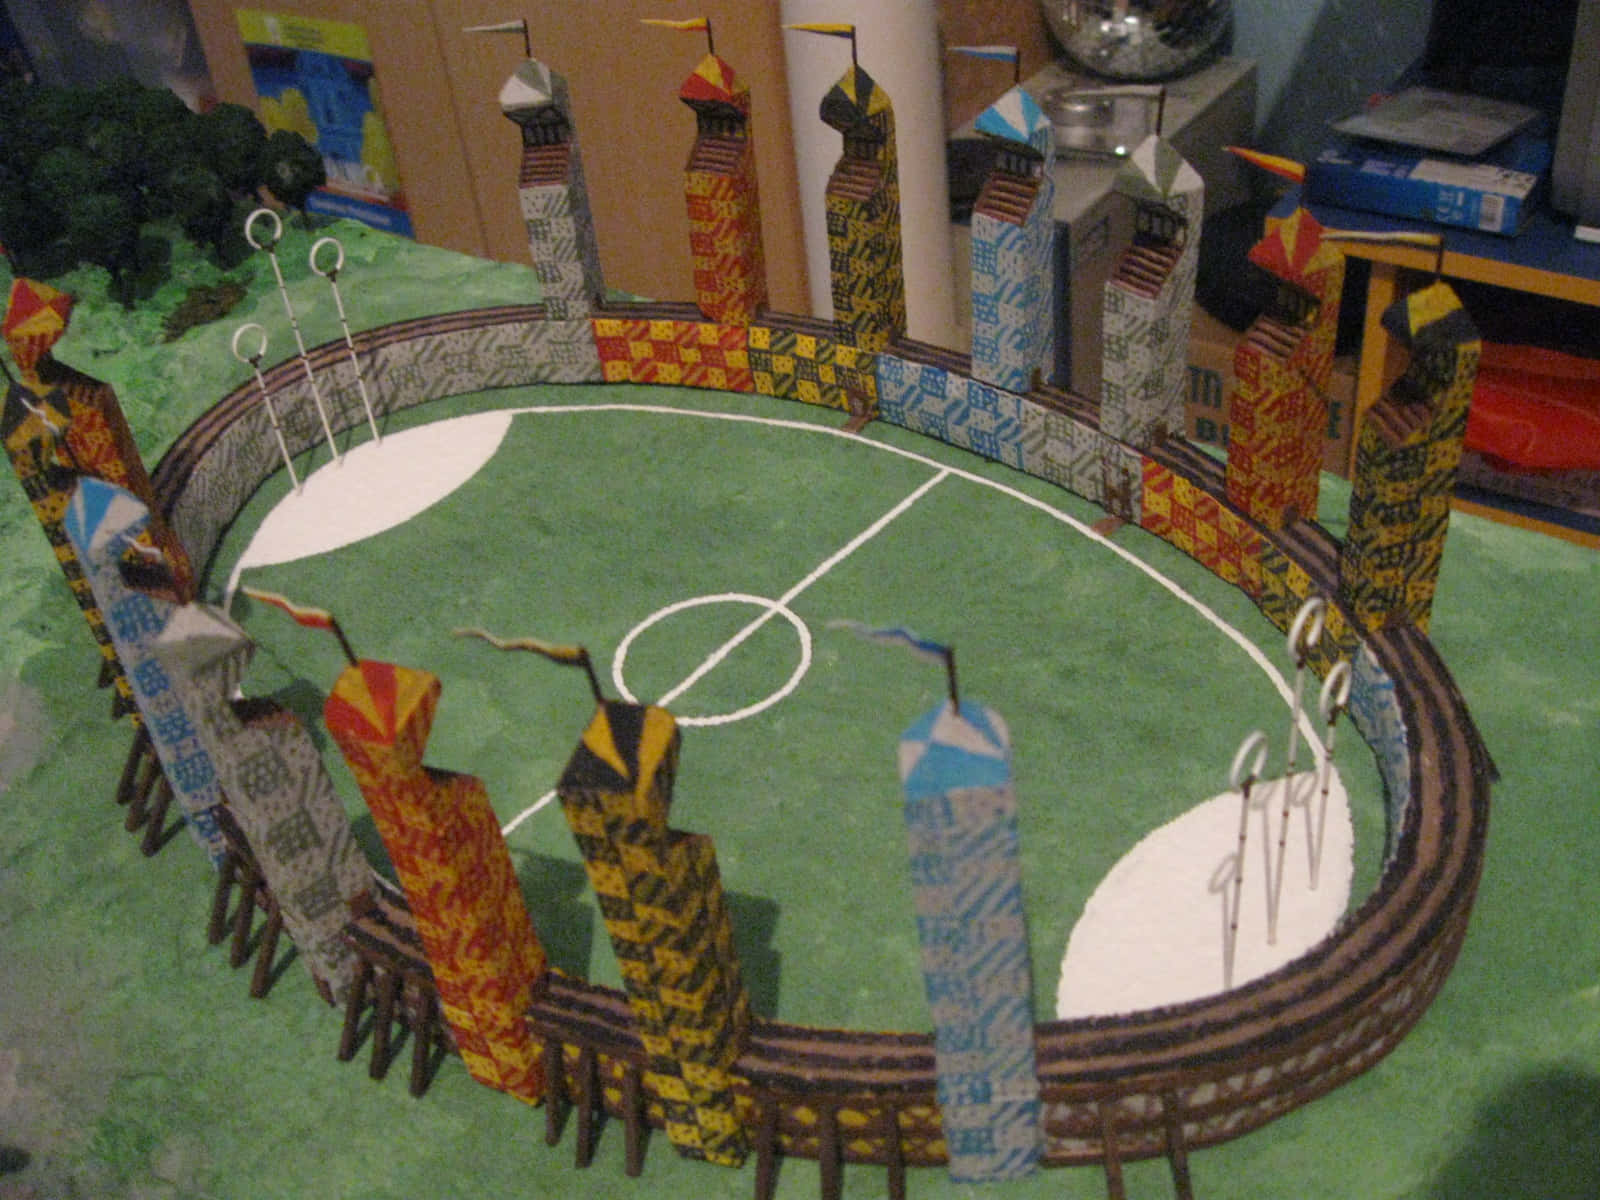 The Quidditch Pitch at Hogwarts School of Witchcraft and Wizardry Wallpaper